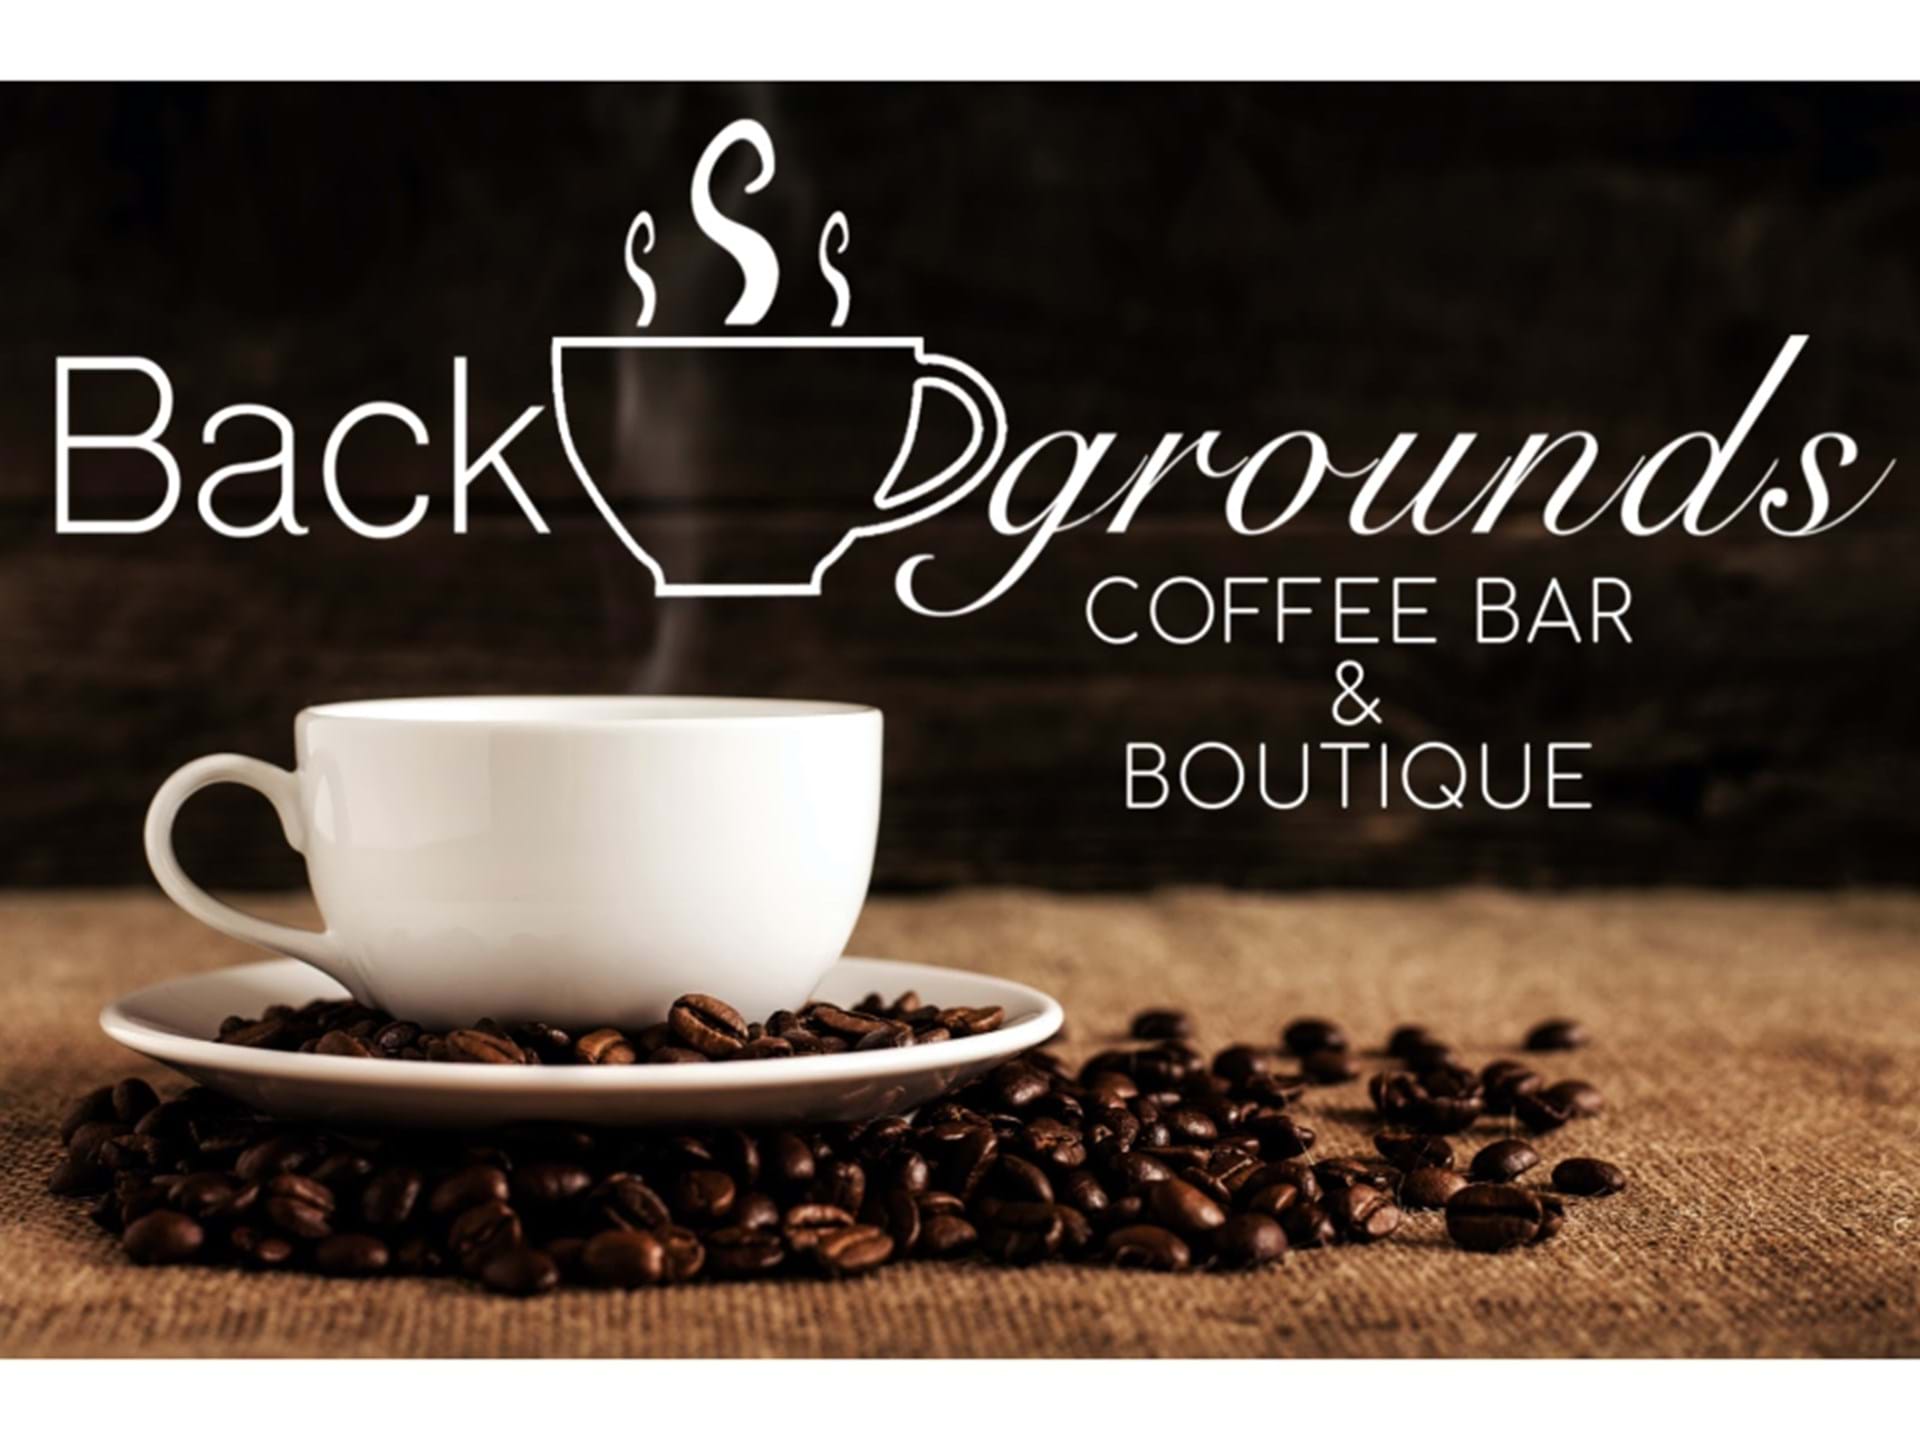 Backgrounds Coffeebar & Boutique